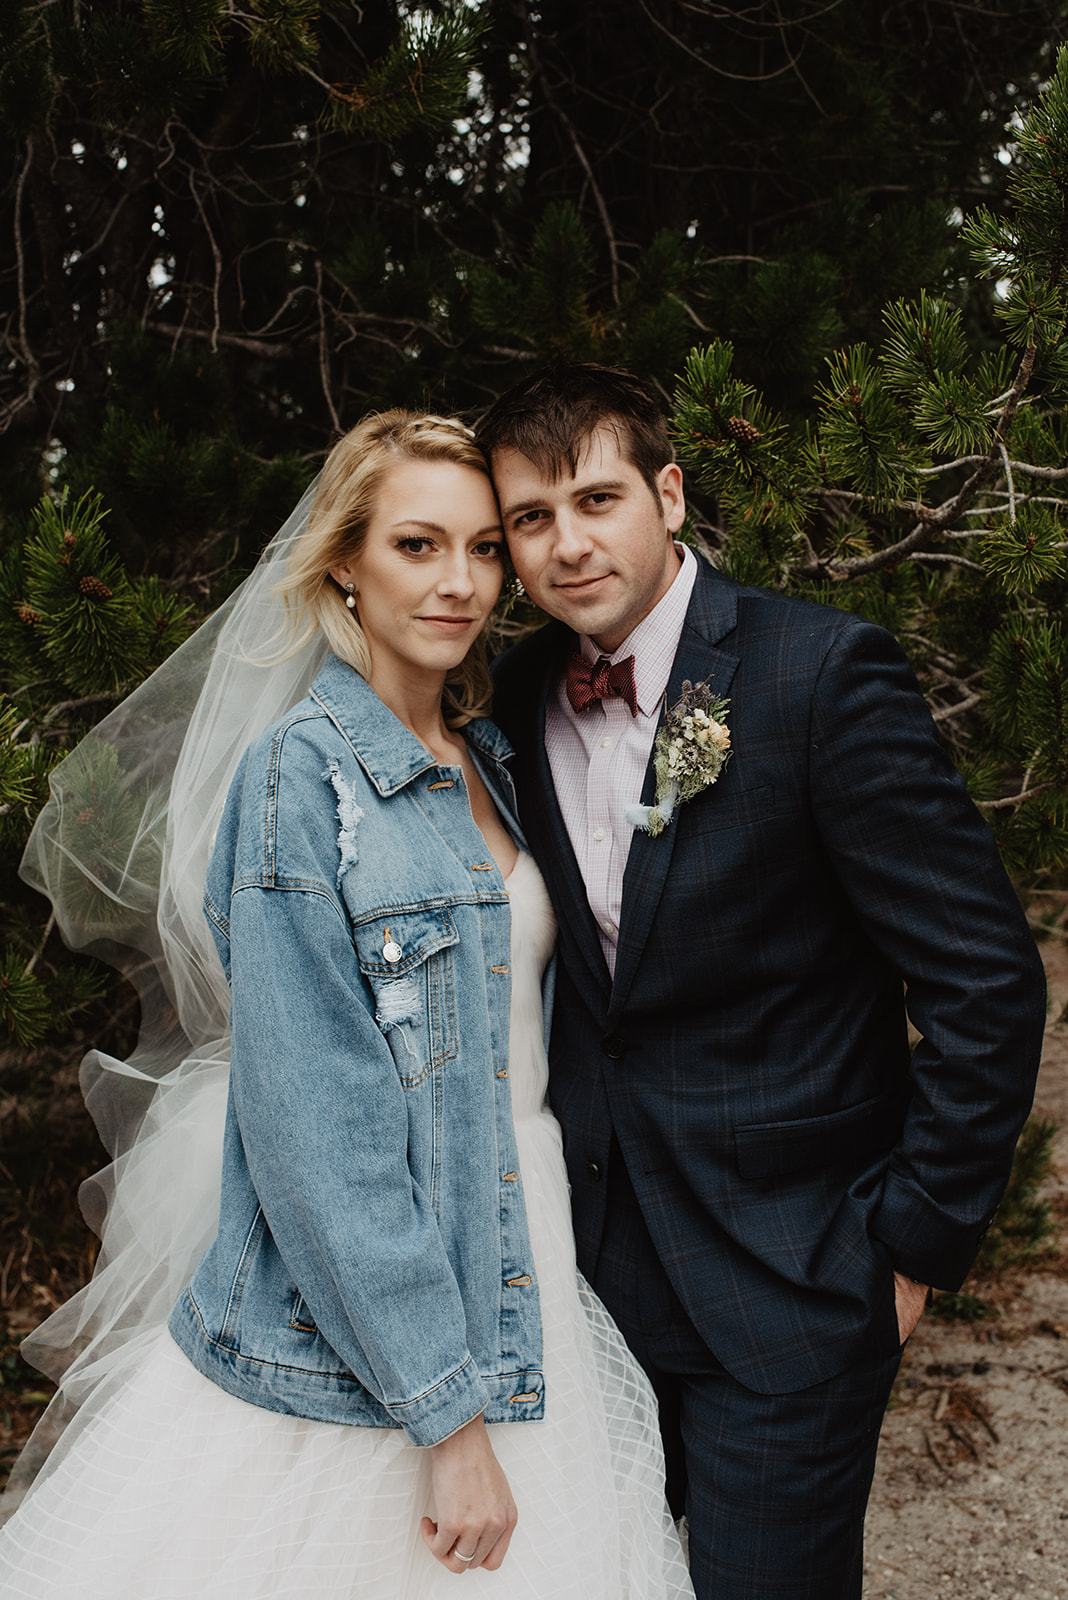 Bentwood Inn weddings bride in a cute demin jacket with her new last name on the back while standing next to her groom who is in a blue suit as they both smolder at the camera while standing in front of evergreens in Jackson Hole, taken by Jackson Hole wedding photographers